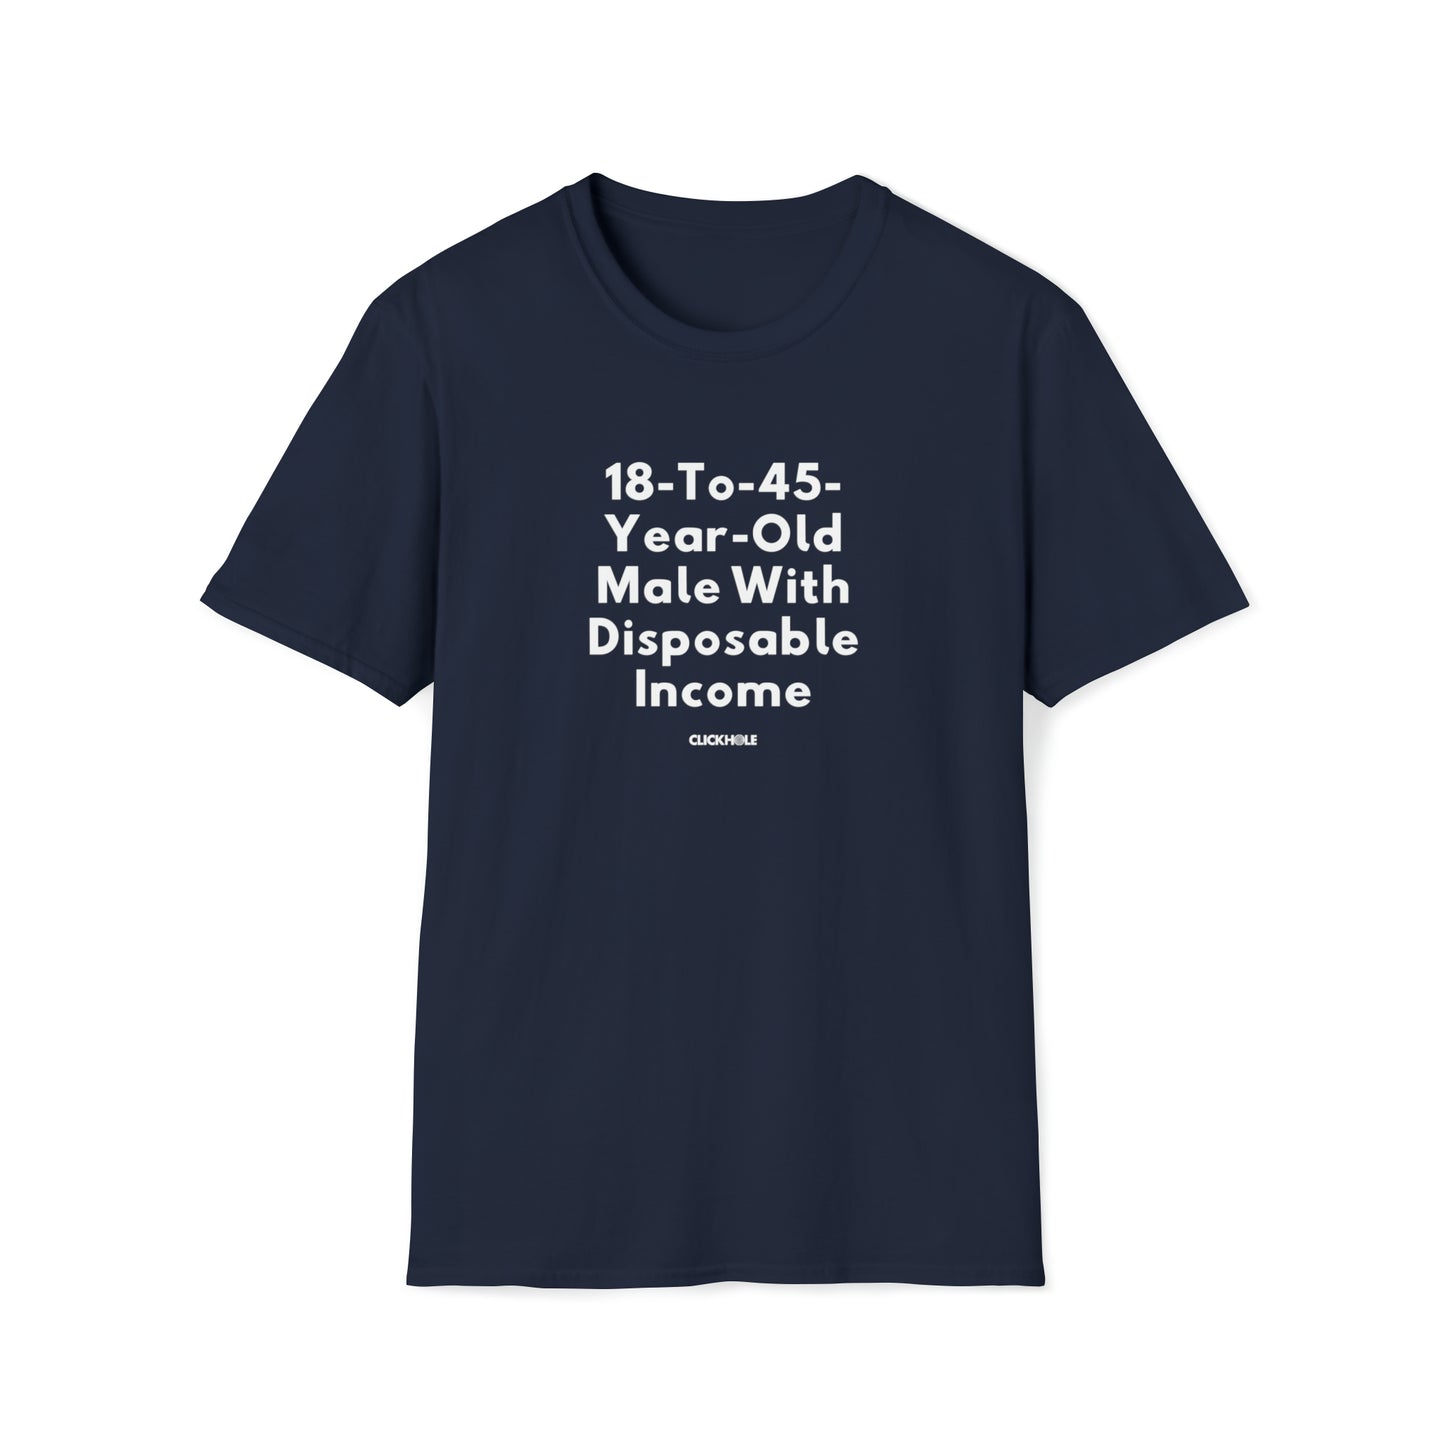 "18-To-45-Year-Old Male With Disposable Income" Shirt